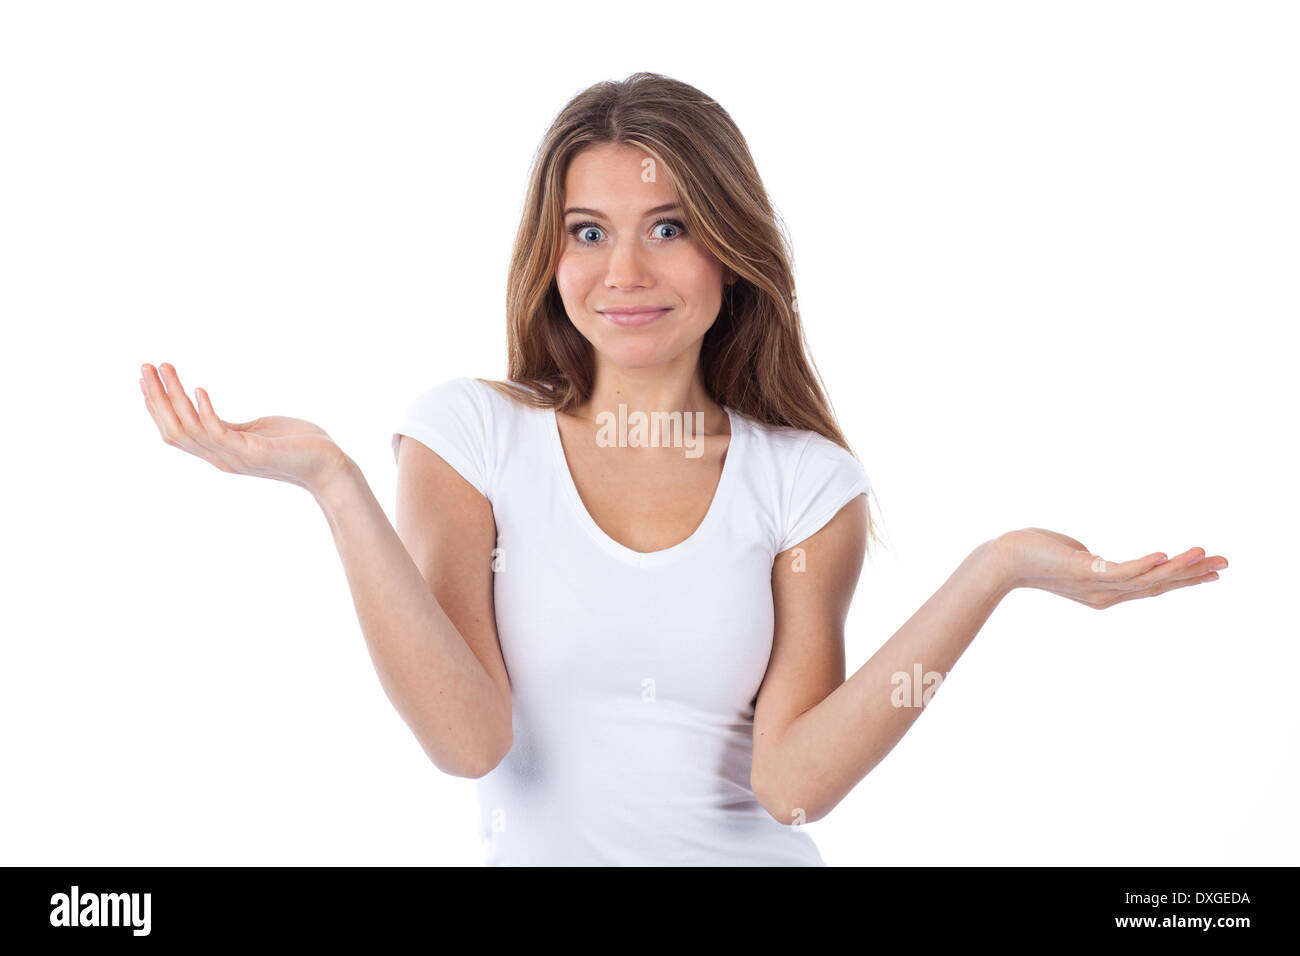 Portrait of a beautiful woman having a doubting gesture, isolated on white Stock Photo